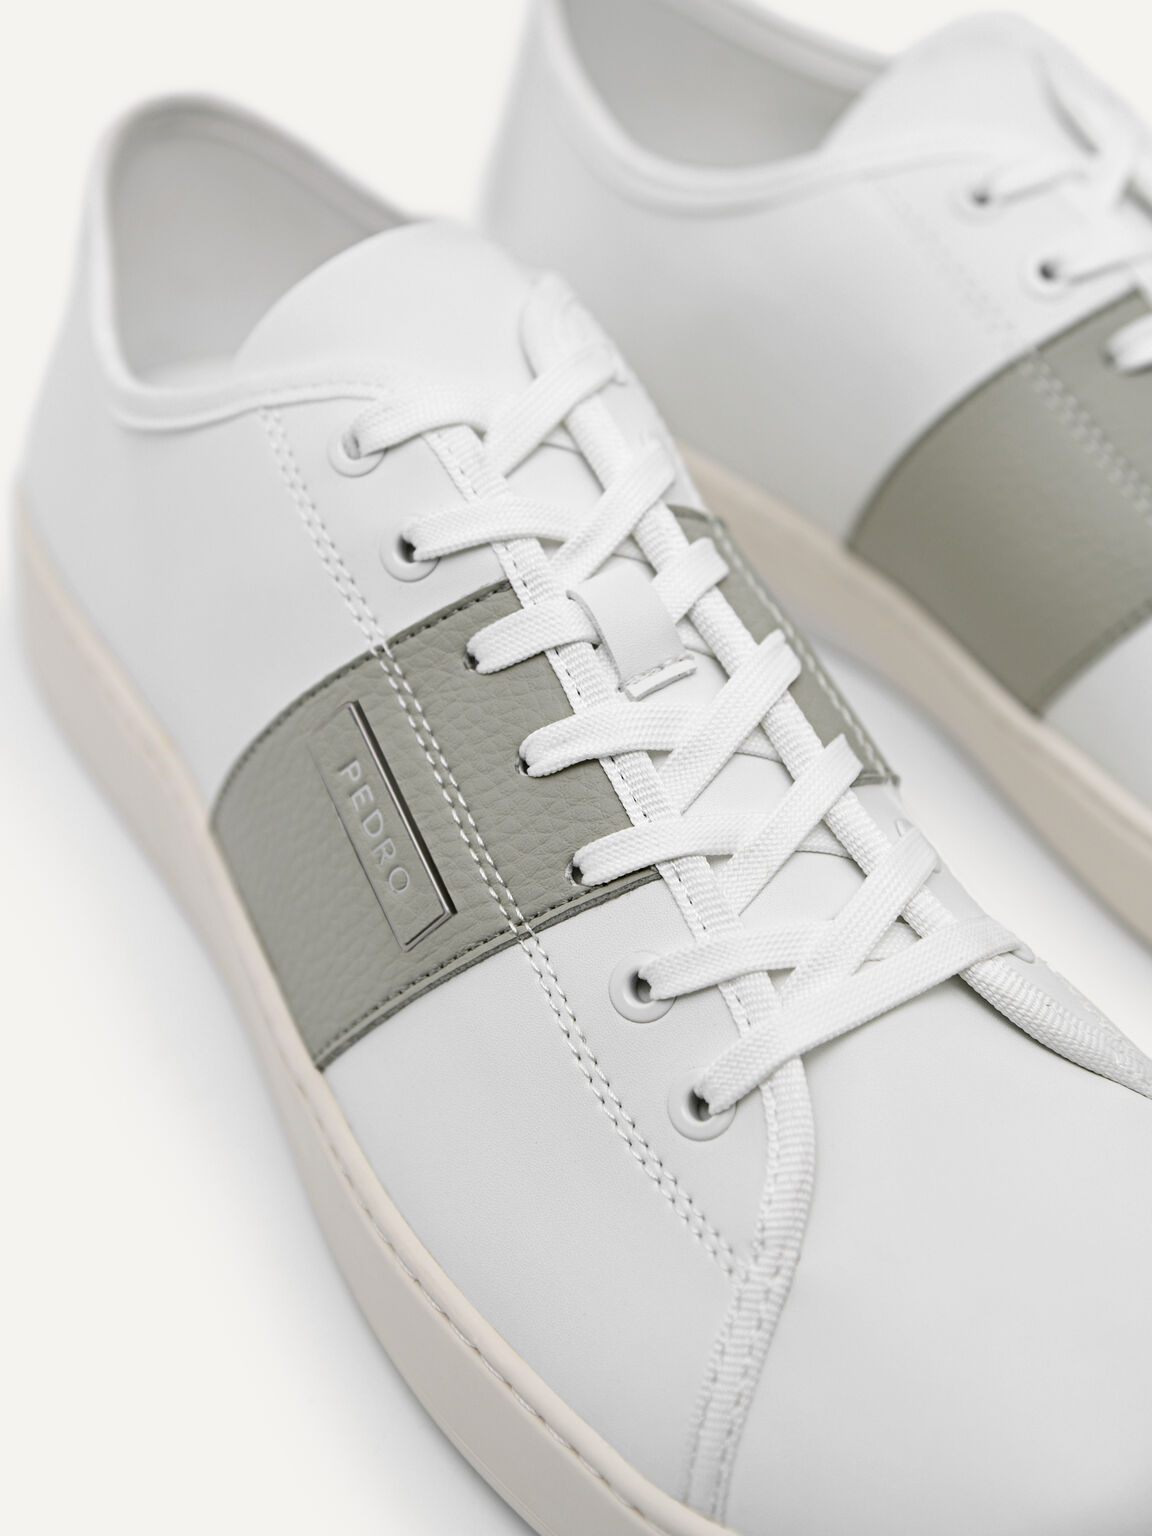 Lace-Up Sneakers, White